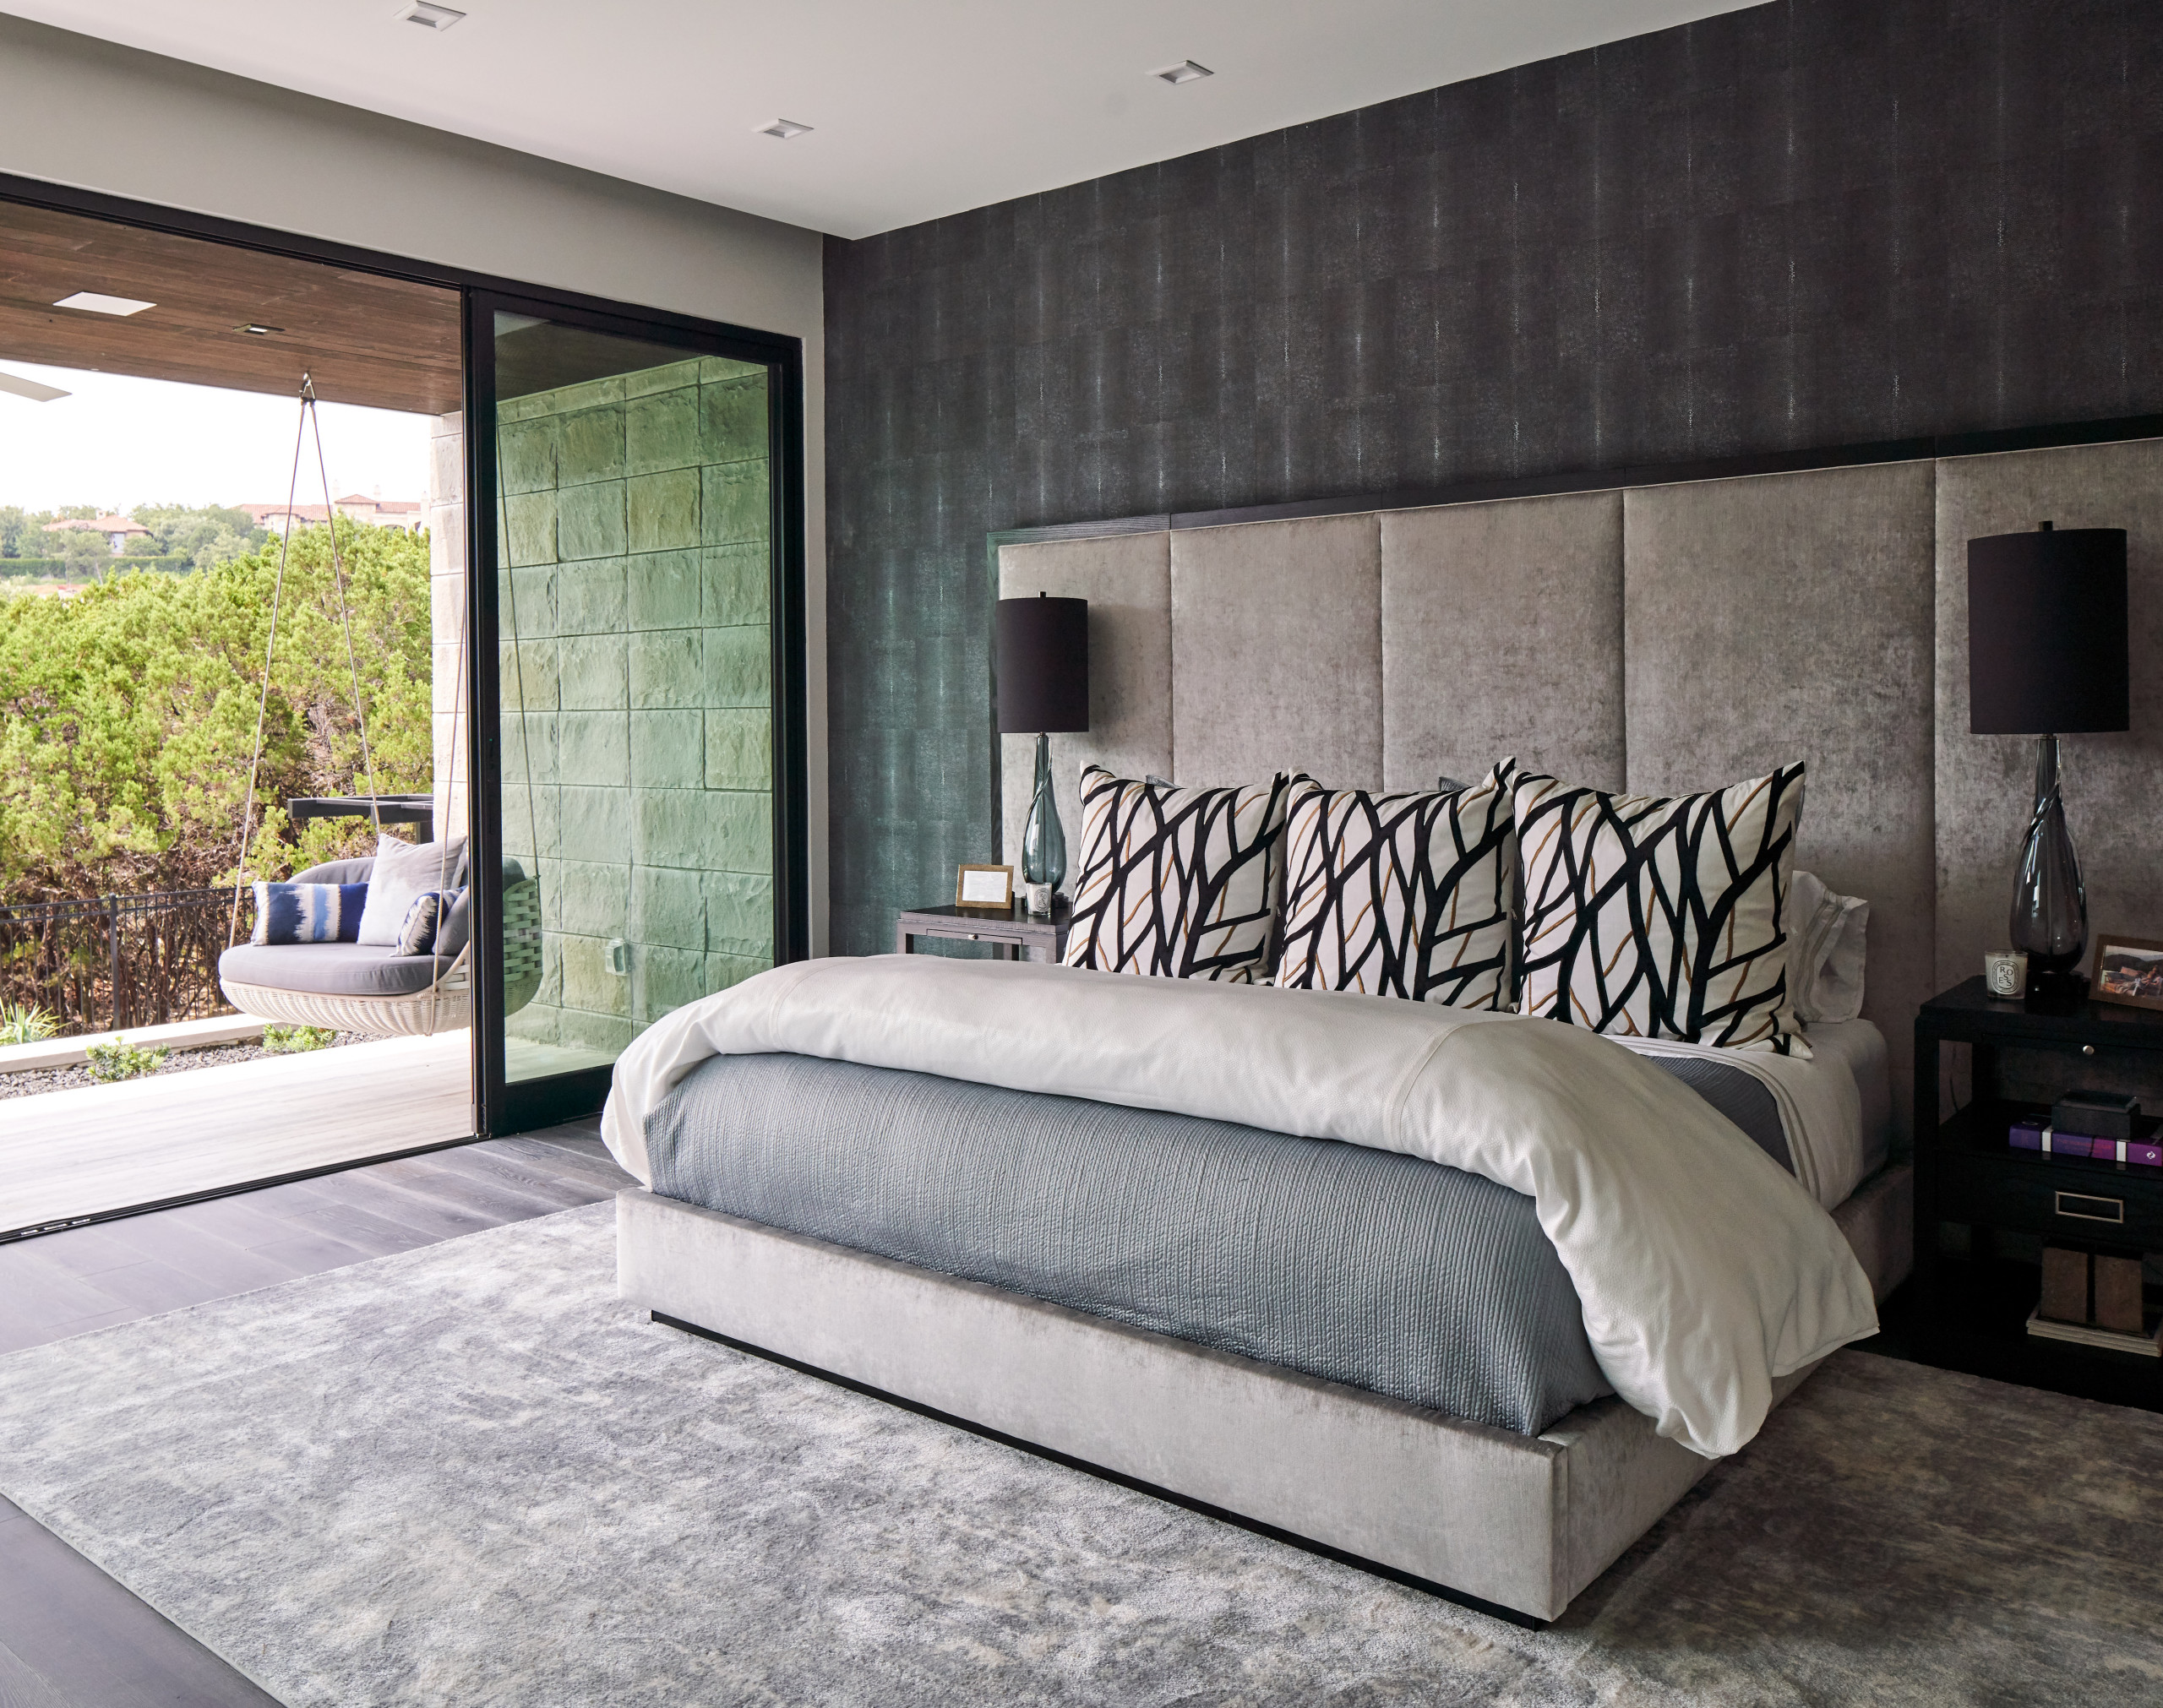 75 Wallpaper Bedroom Ideas You'll Love - March, 2023 | Houzz